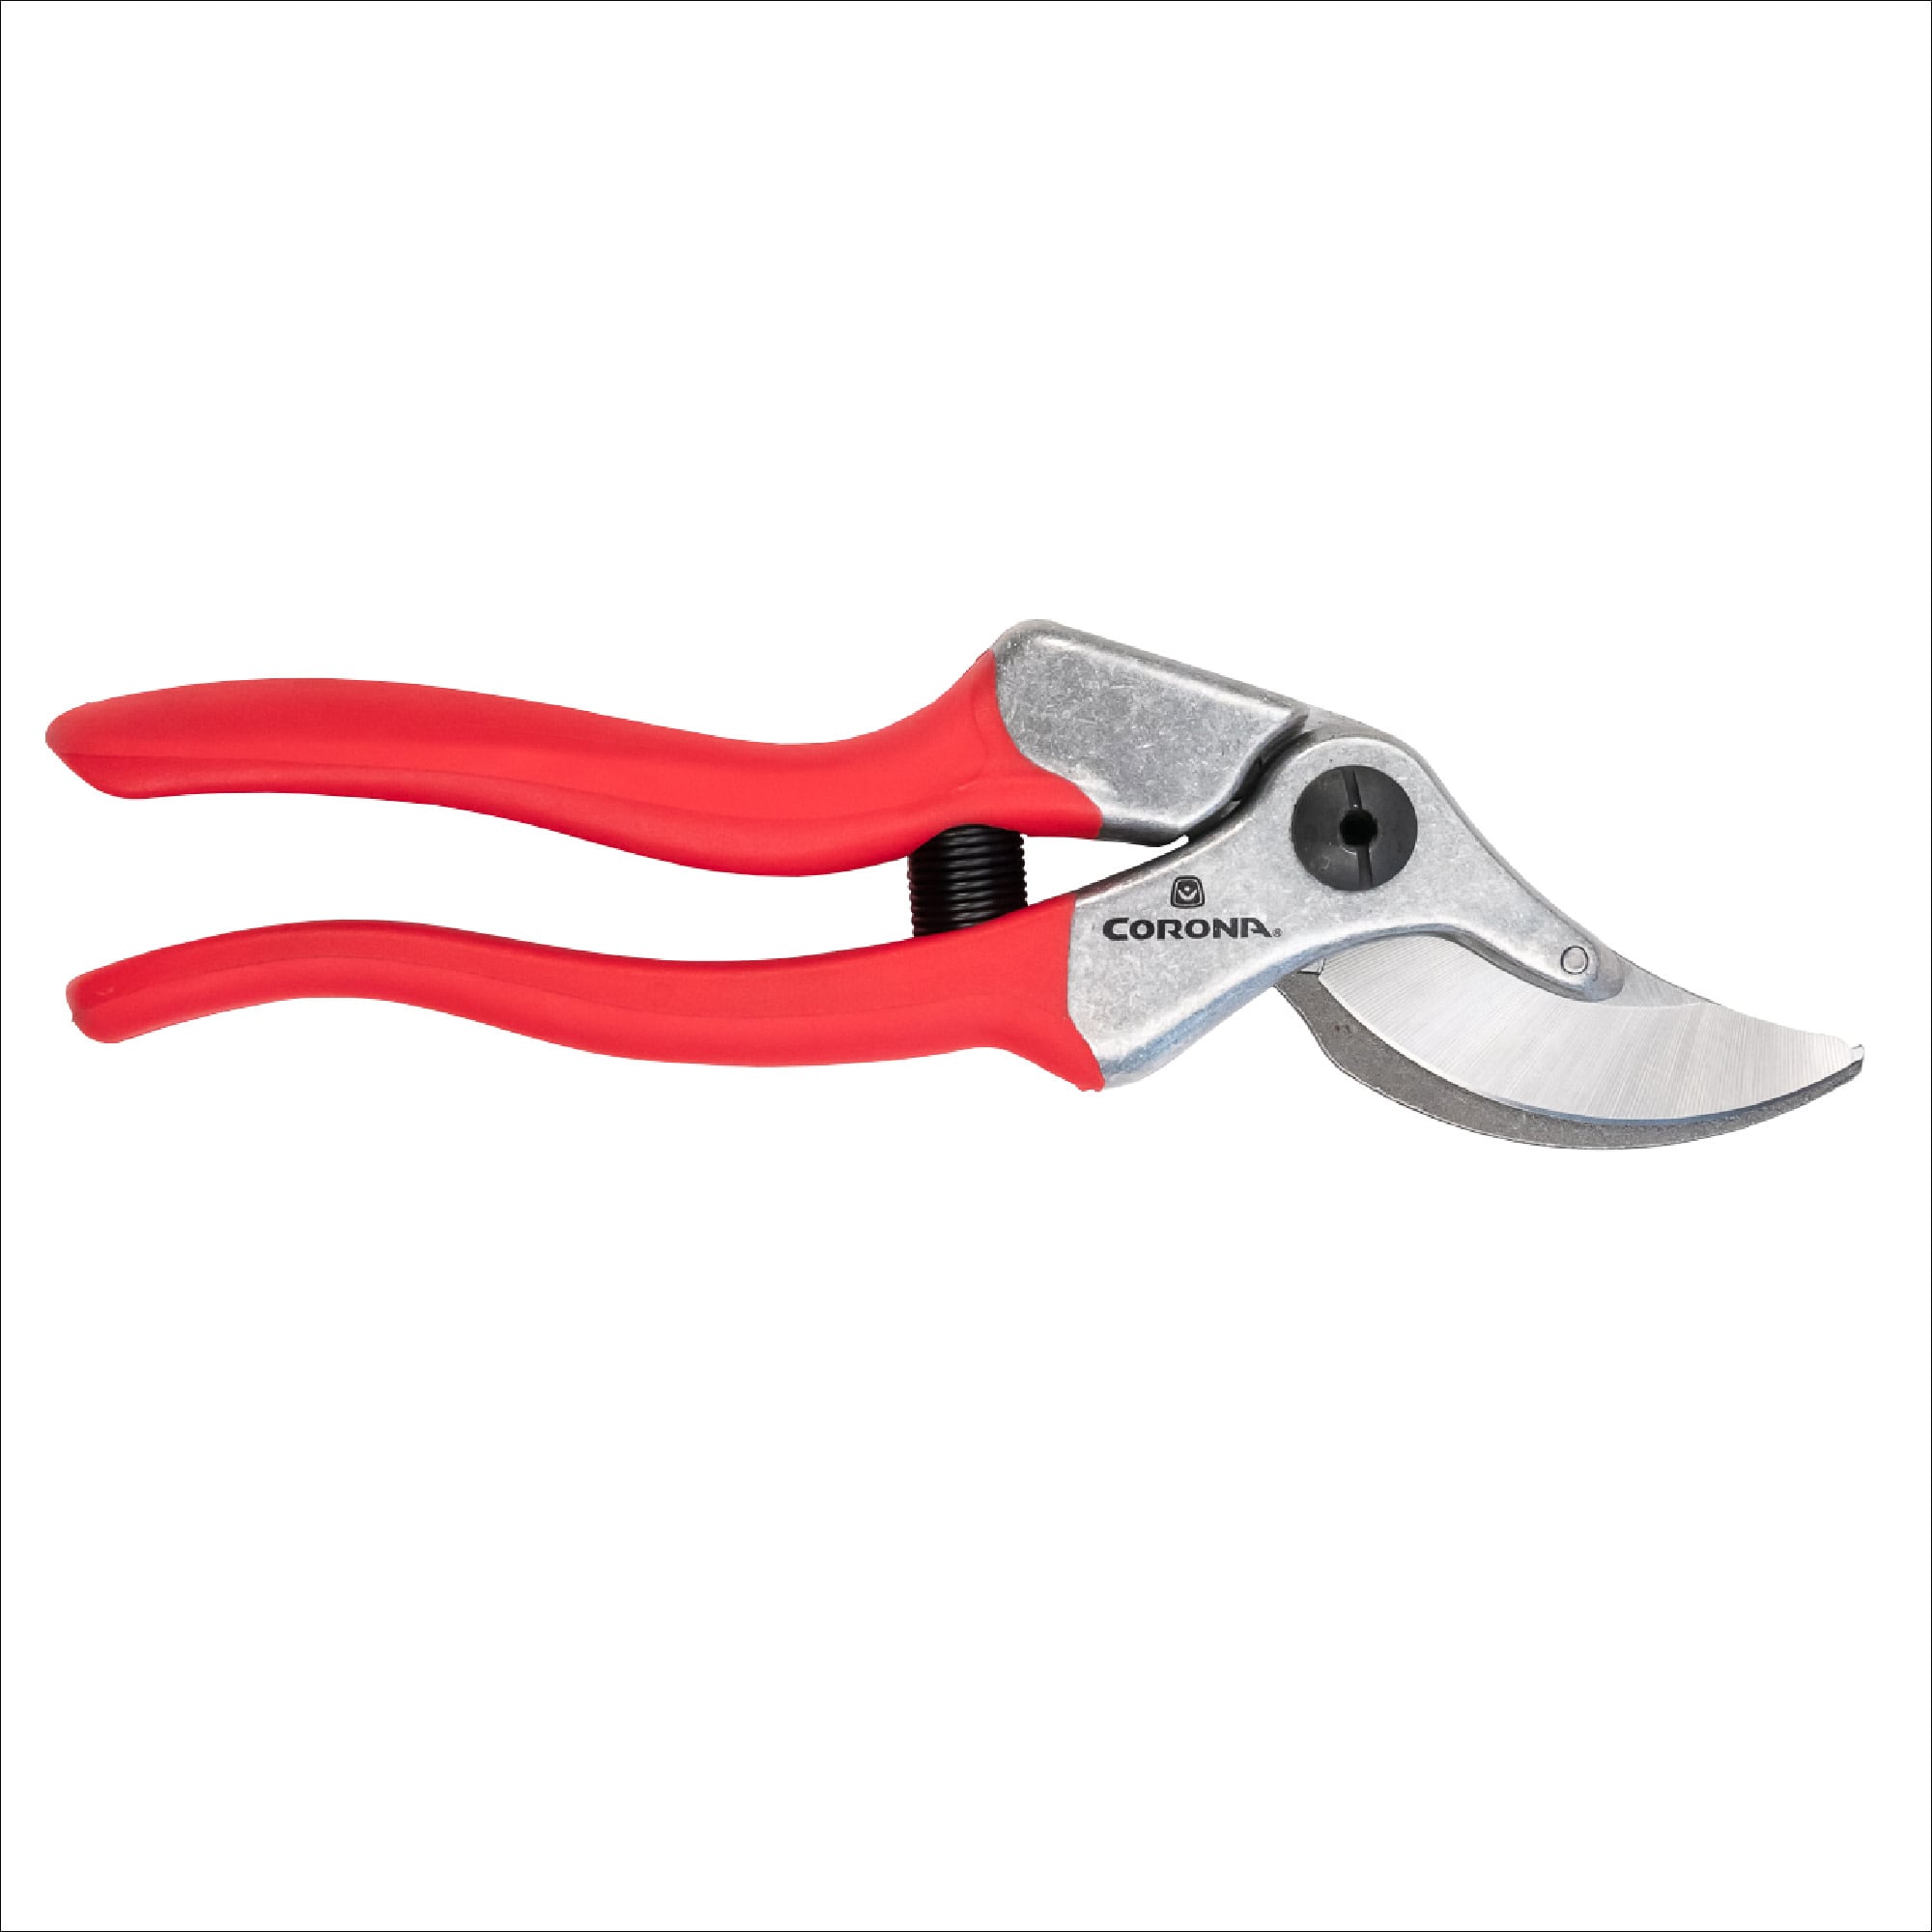 Felco Small Hand Bypass Pruning Shear with Rotating Handle